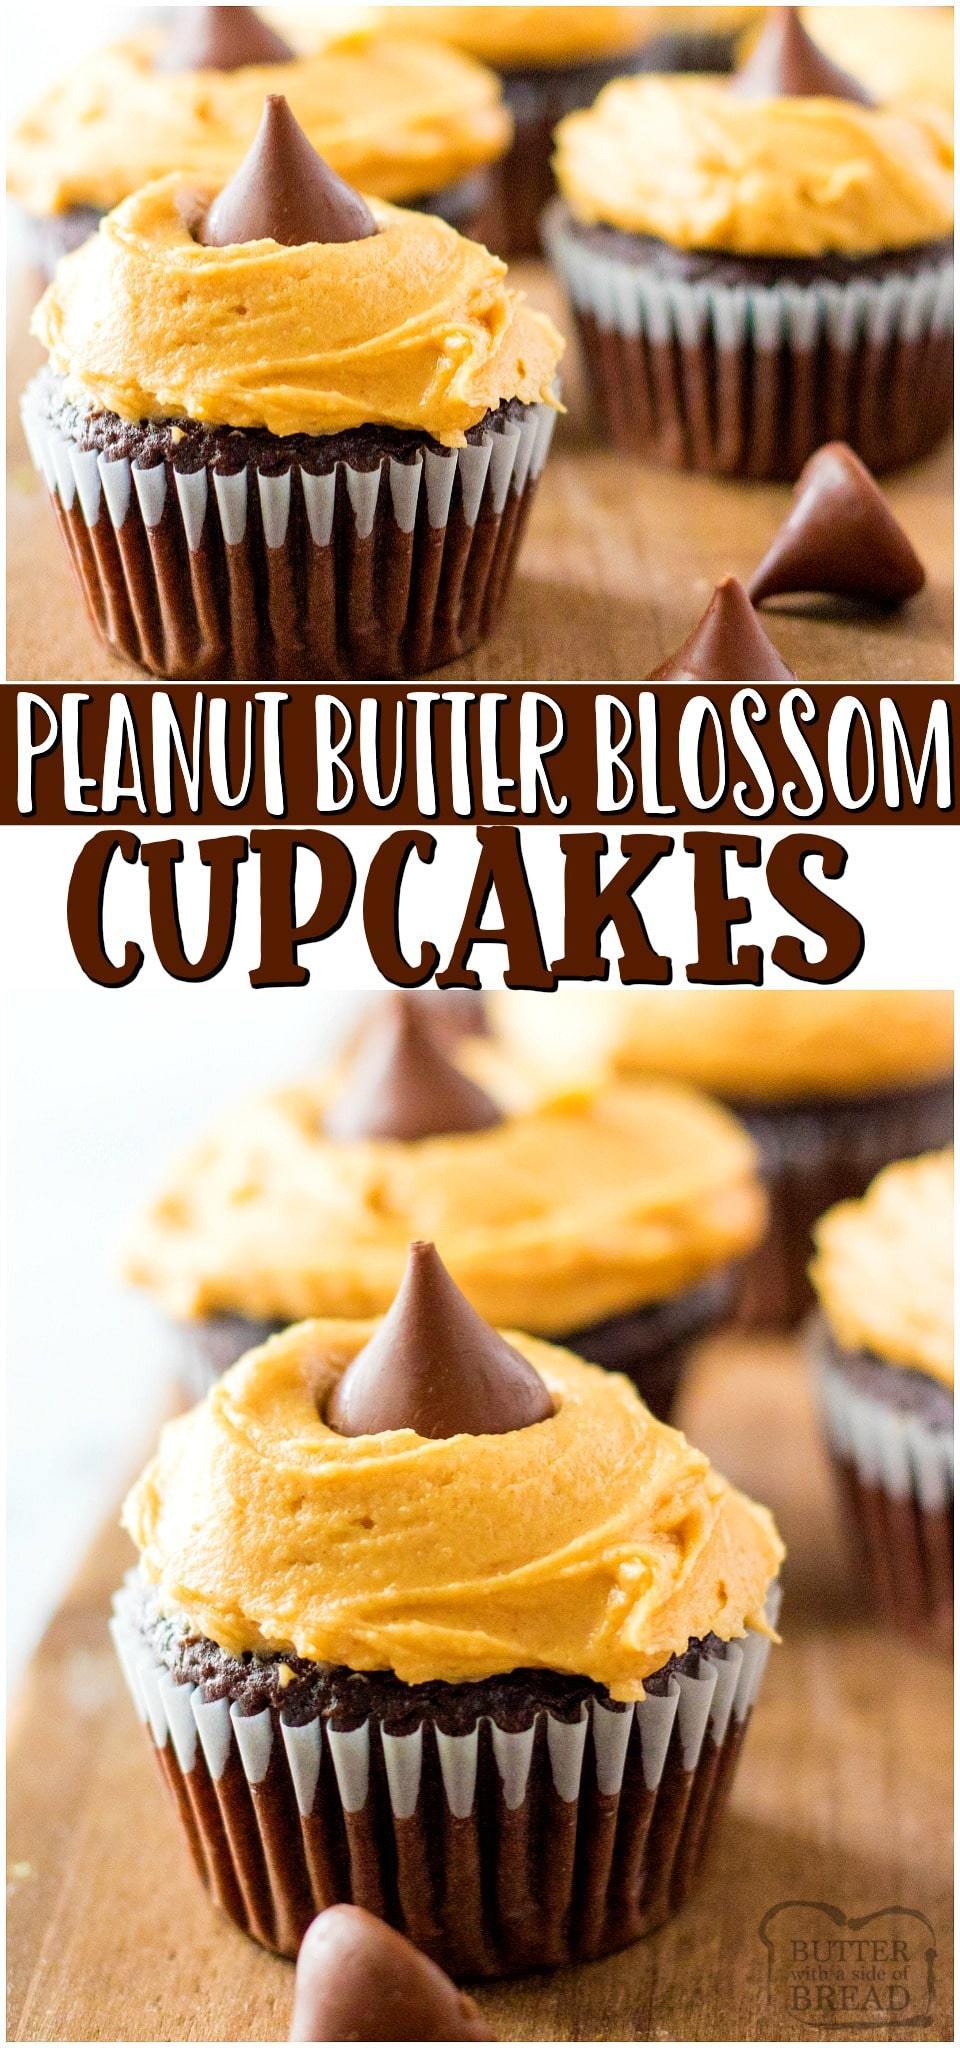 Peanut butter blossom cupcakes~ a fun twist on traditional peanut butter blossom cookies! Chocolate cupcakes topped with Peanut butter cream cheese frosting & a chocolate kiss are a delicious treat!